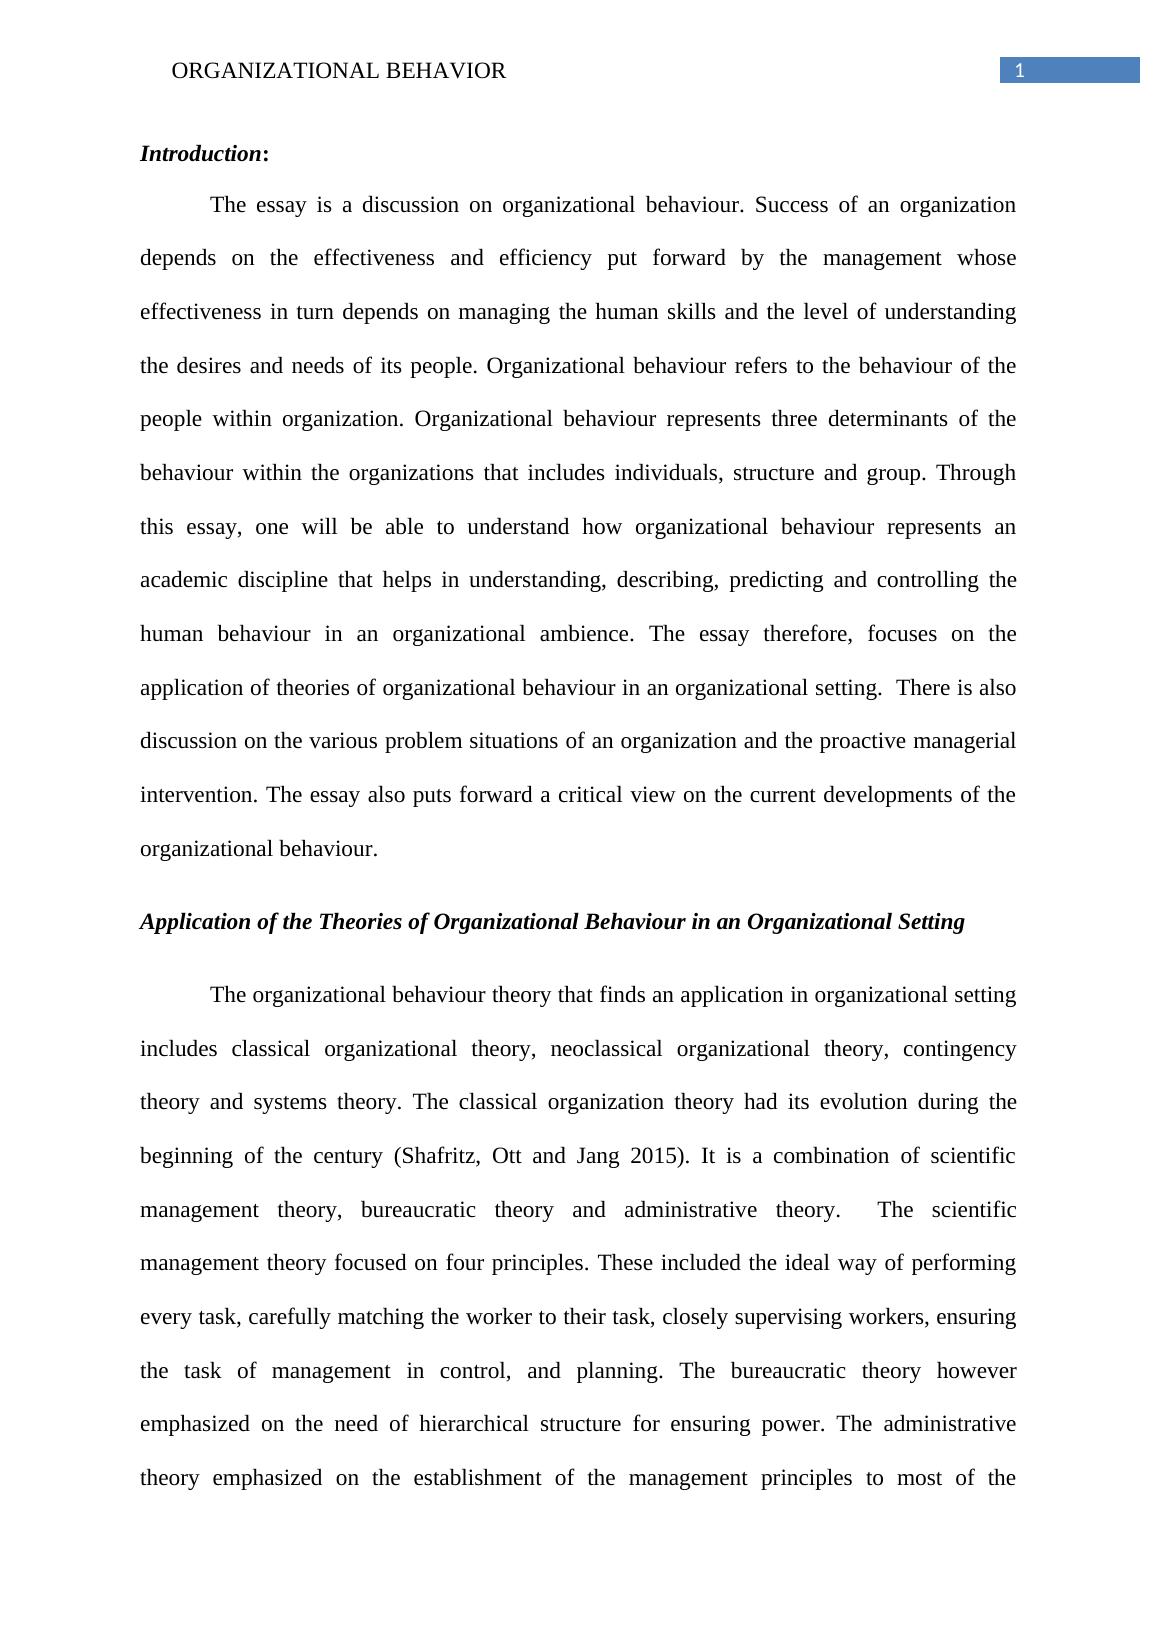 organizational behavior essay questions and answers pdf